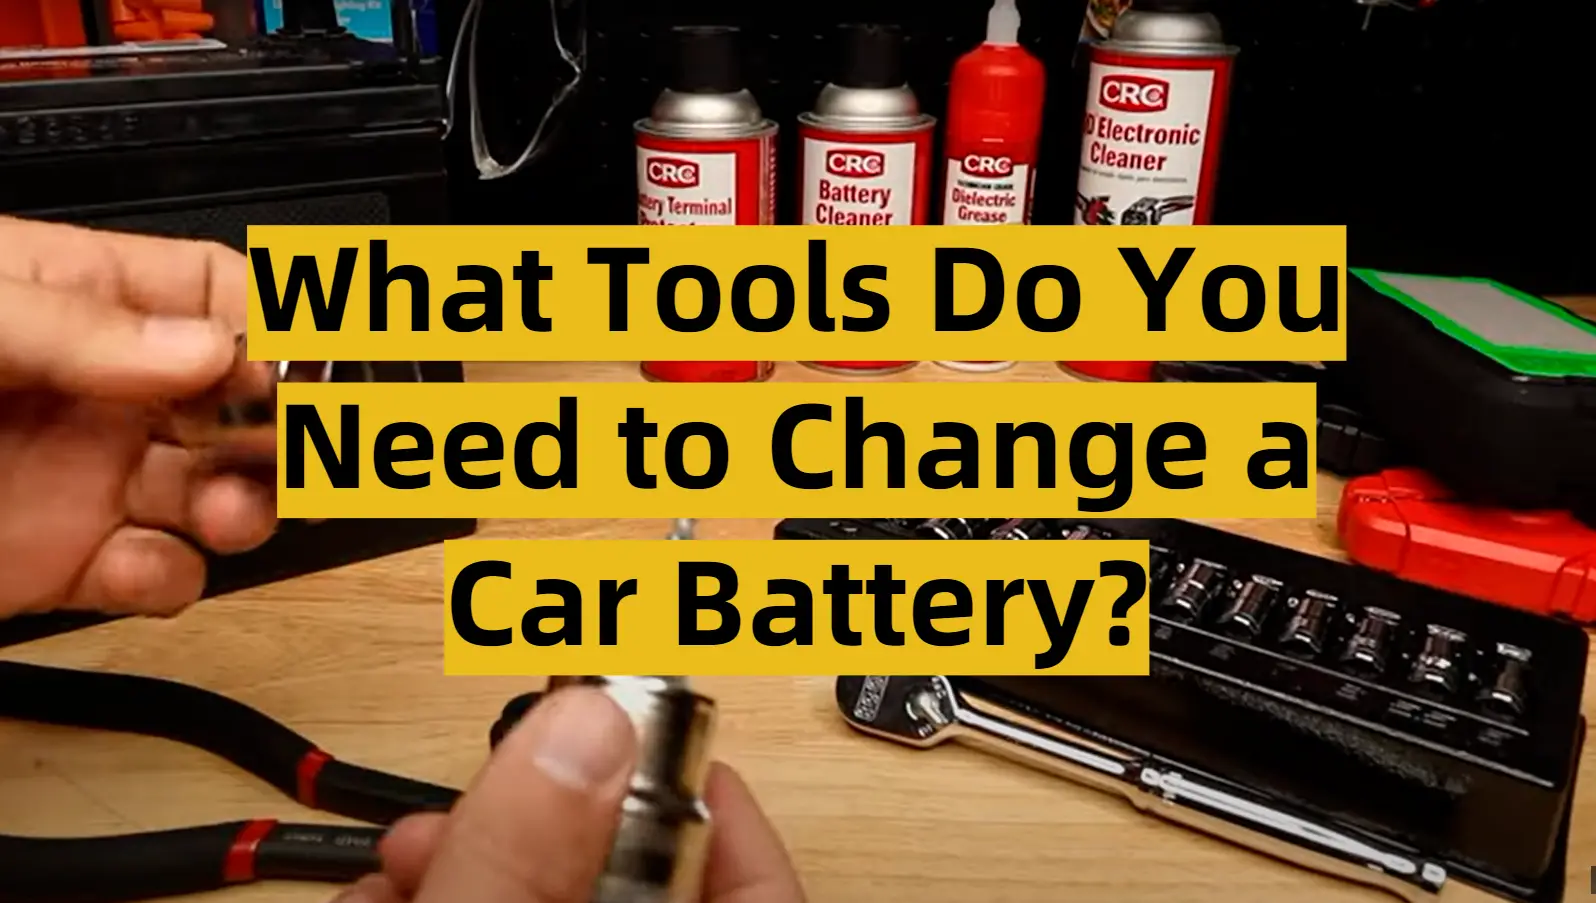 What Tools Do You Need to Change a Car Battery?